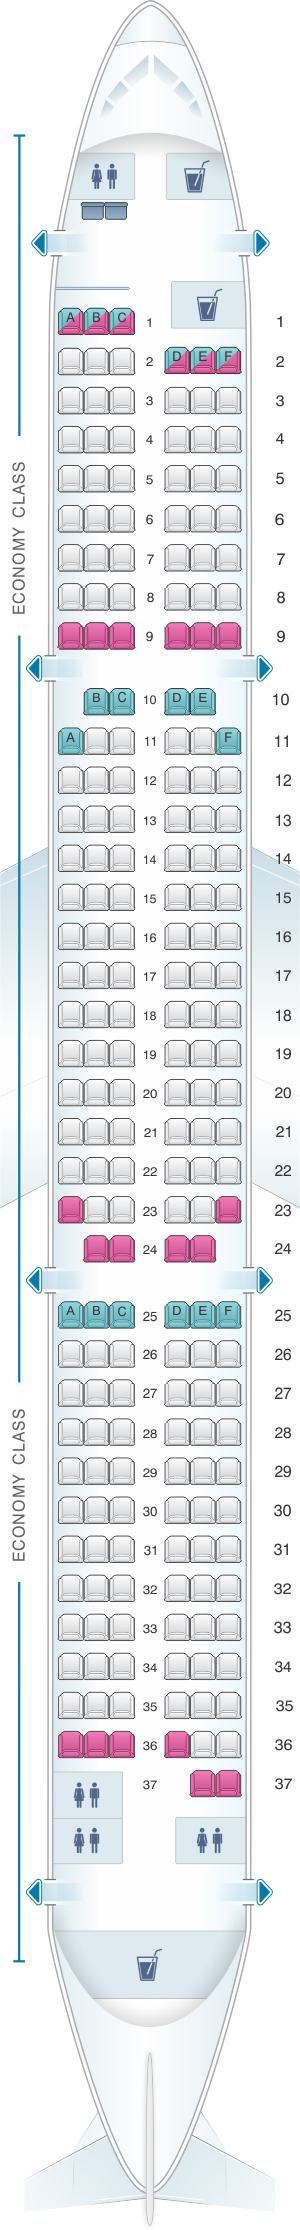 Seat map for Novair Airbus A321 200